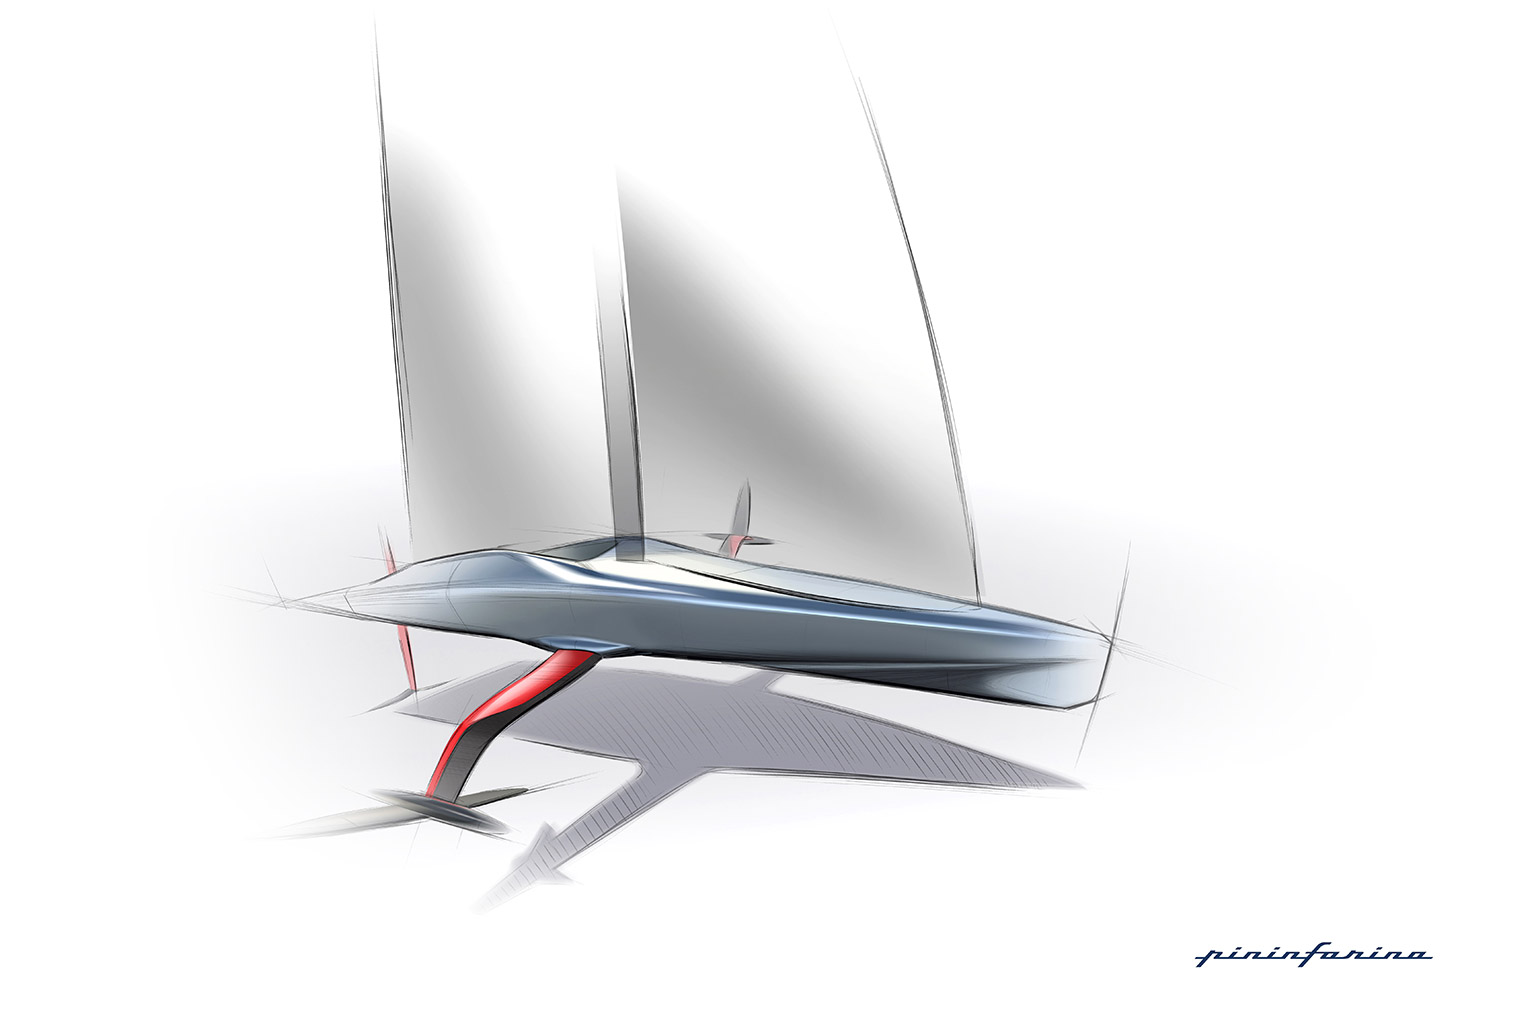 Persico Fly40 now in production. Pininfarina is on board